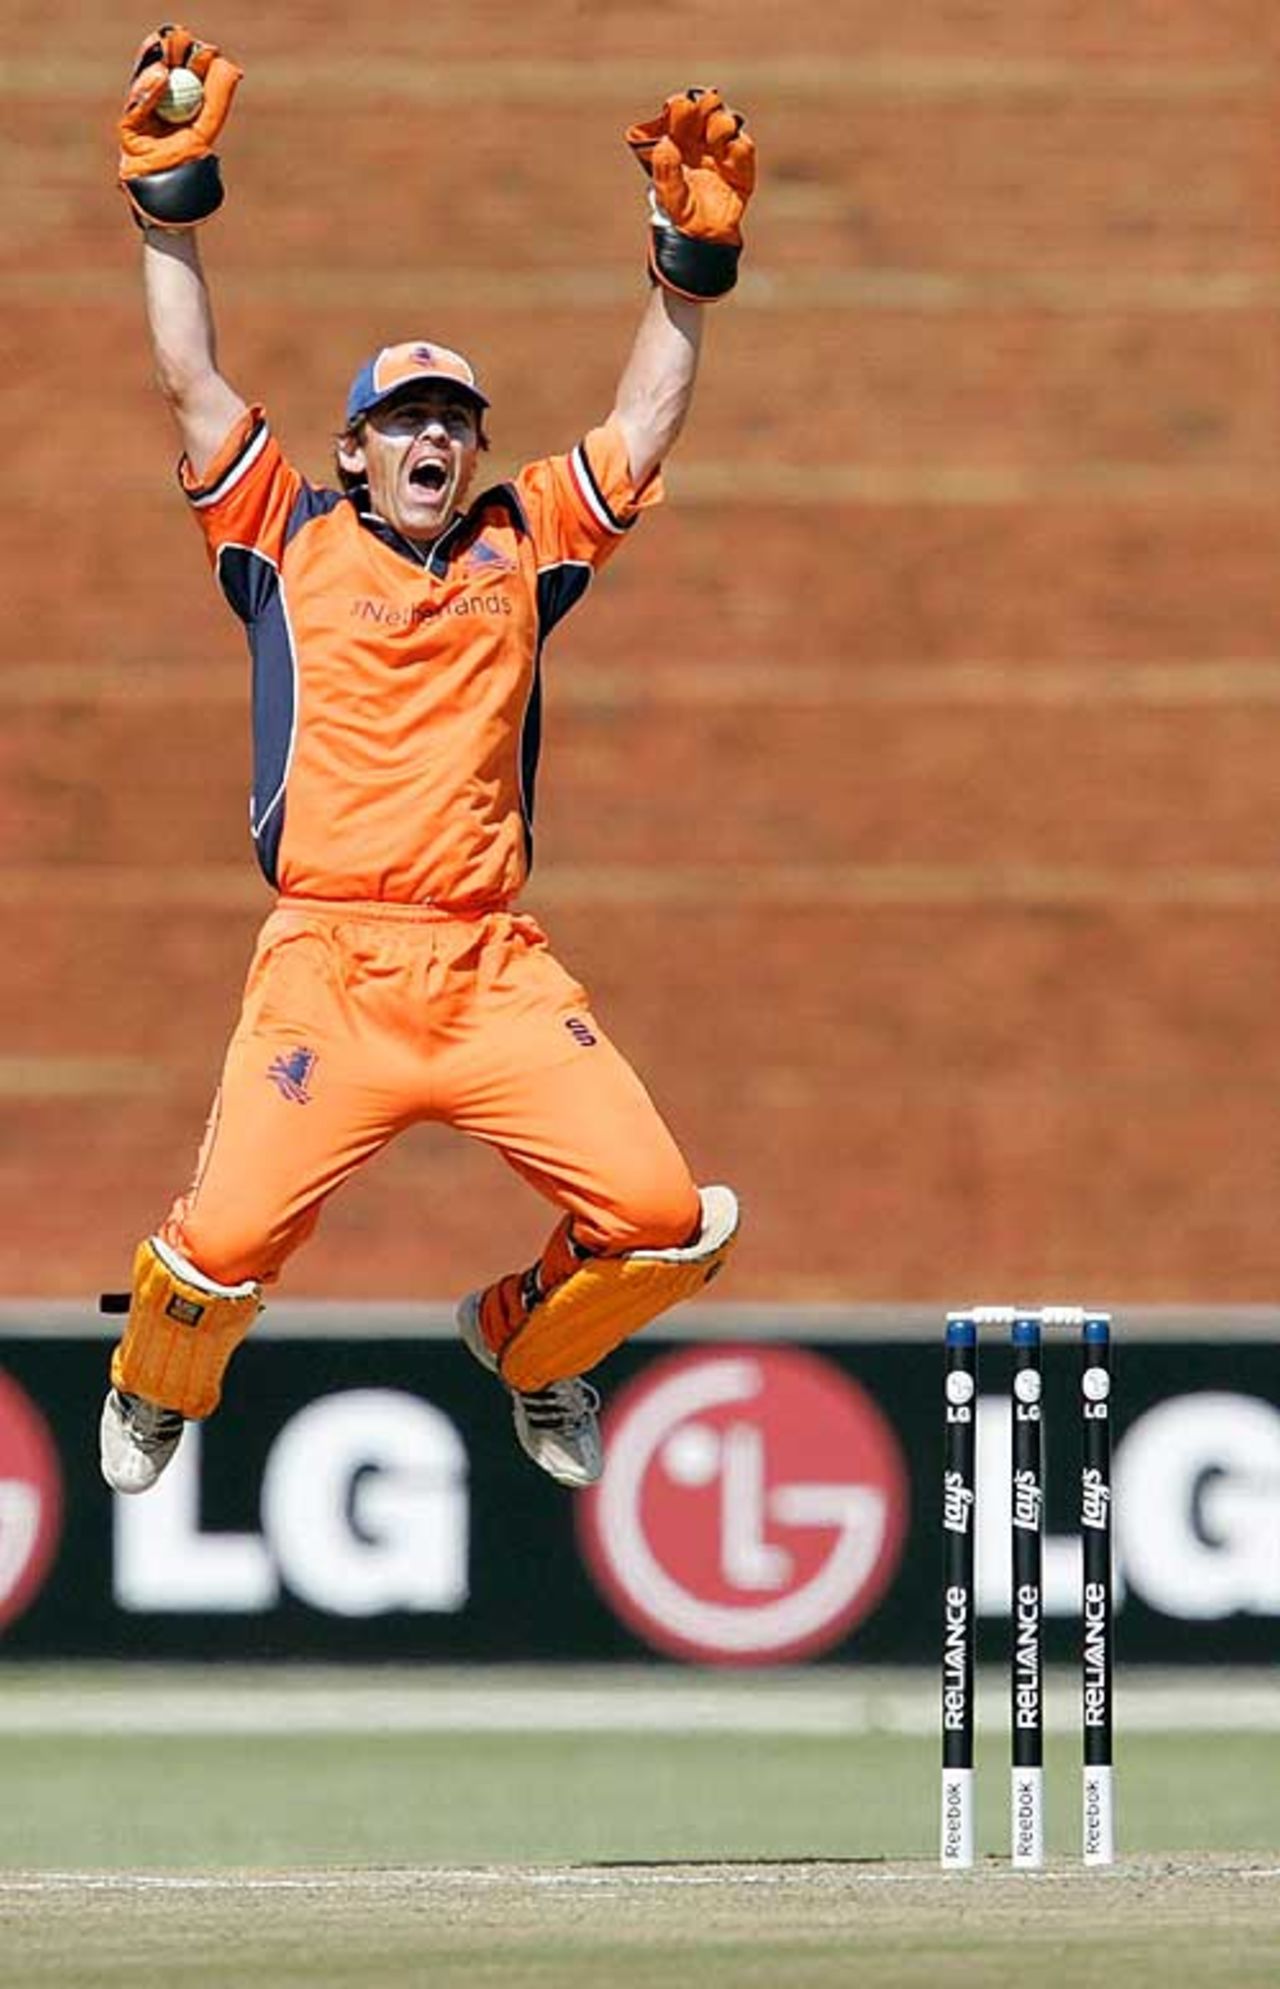 Jeroen Smits in animated appeal, Canada v Netherlands, ICC World Cup Qualifiers, Super Eights, Johannesburg, April 17, 2009